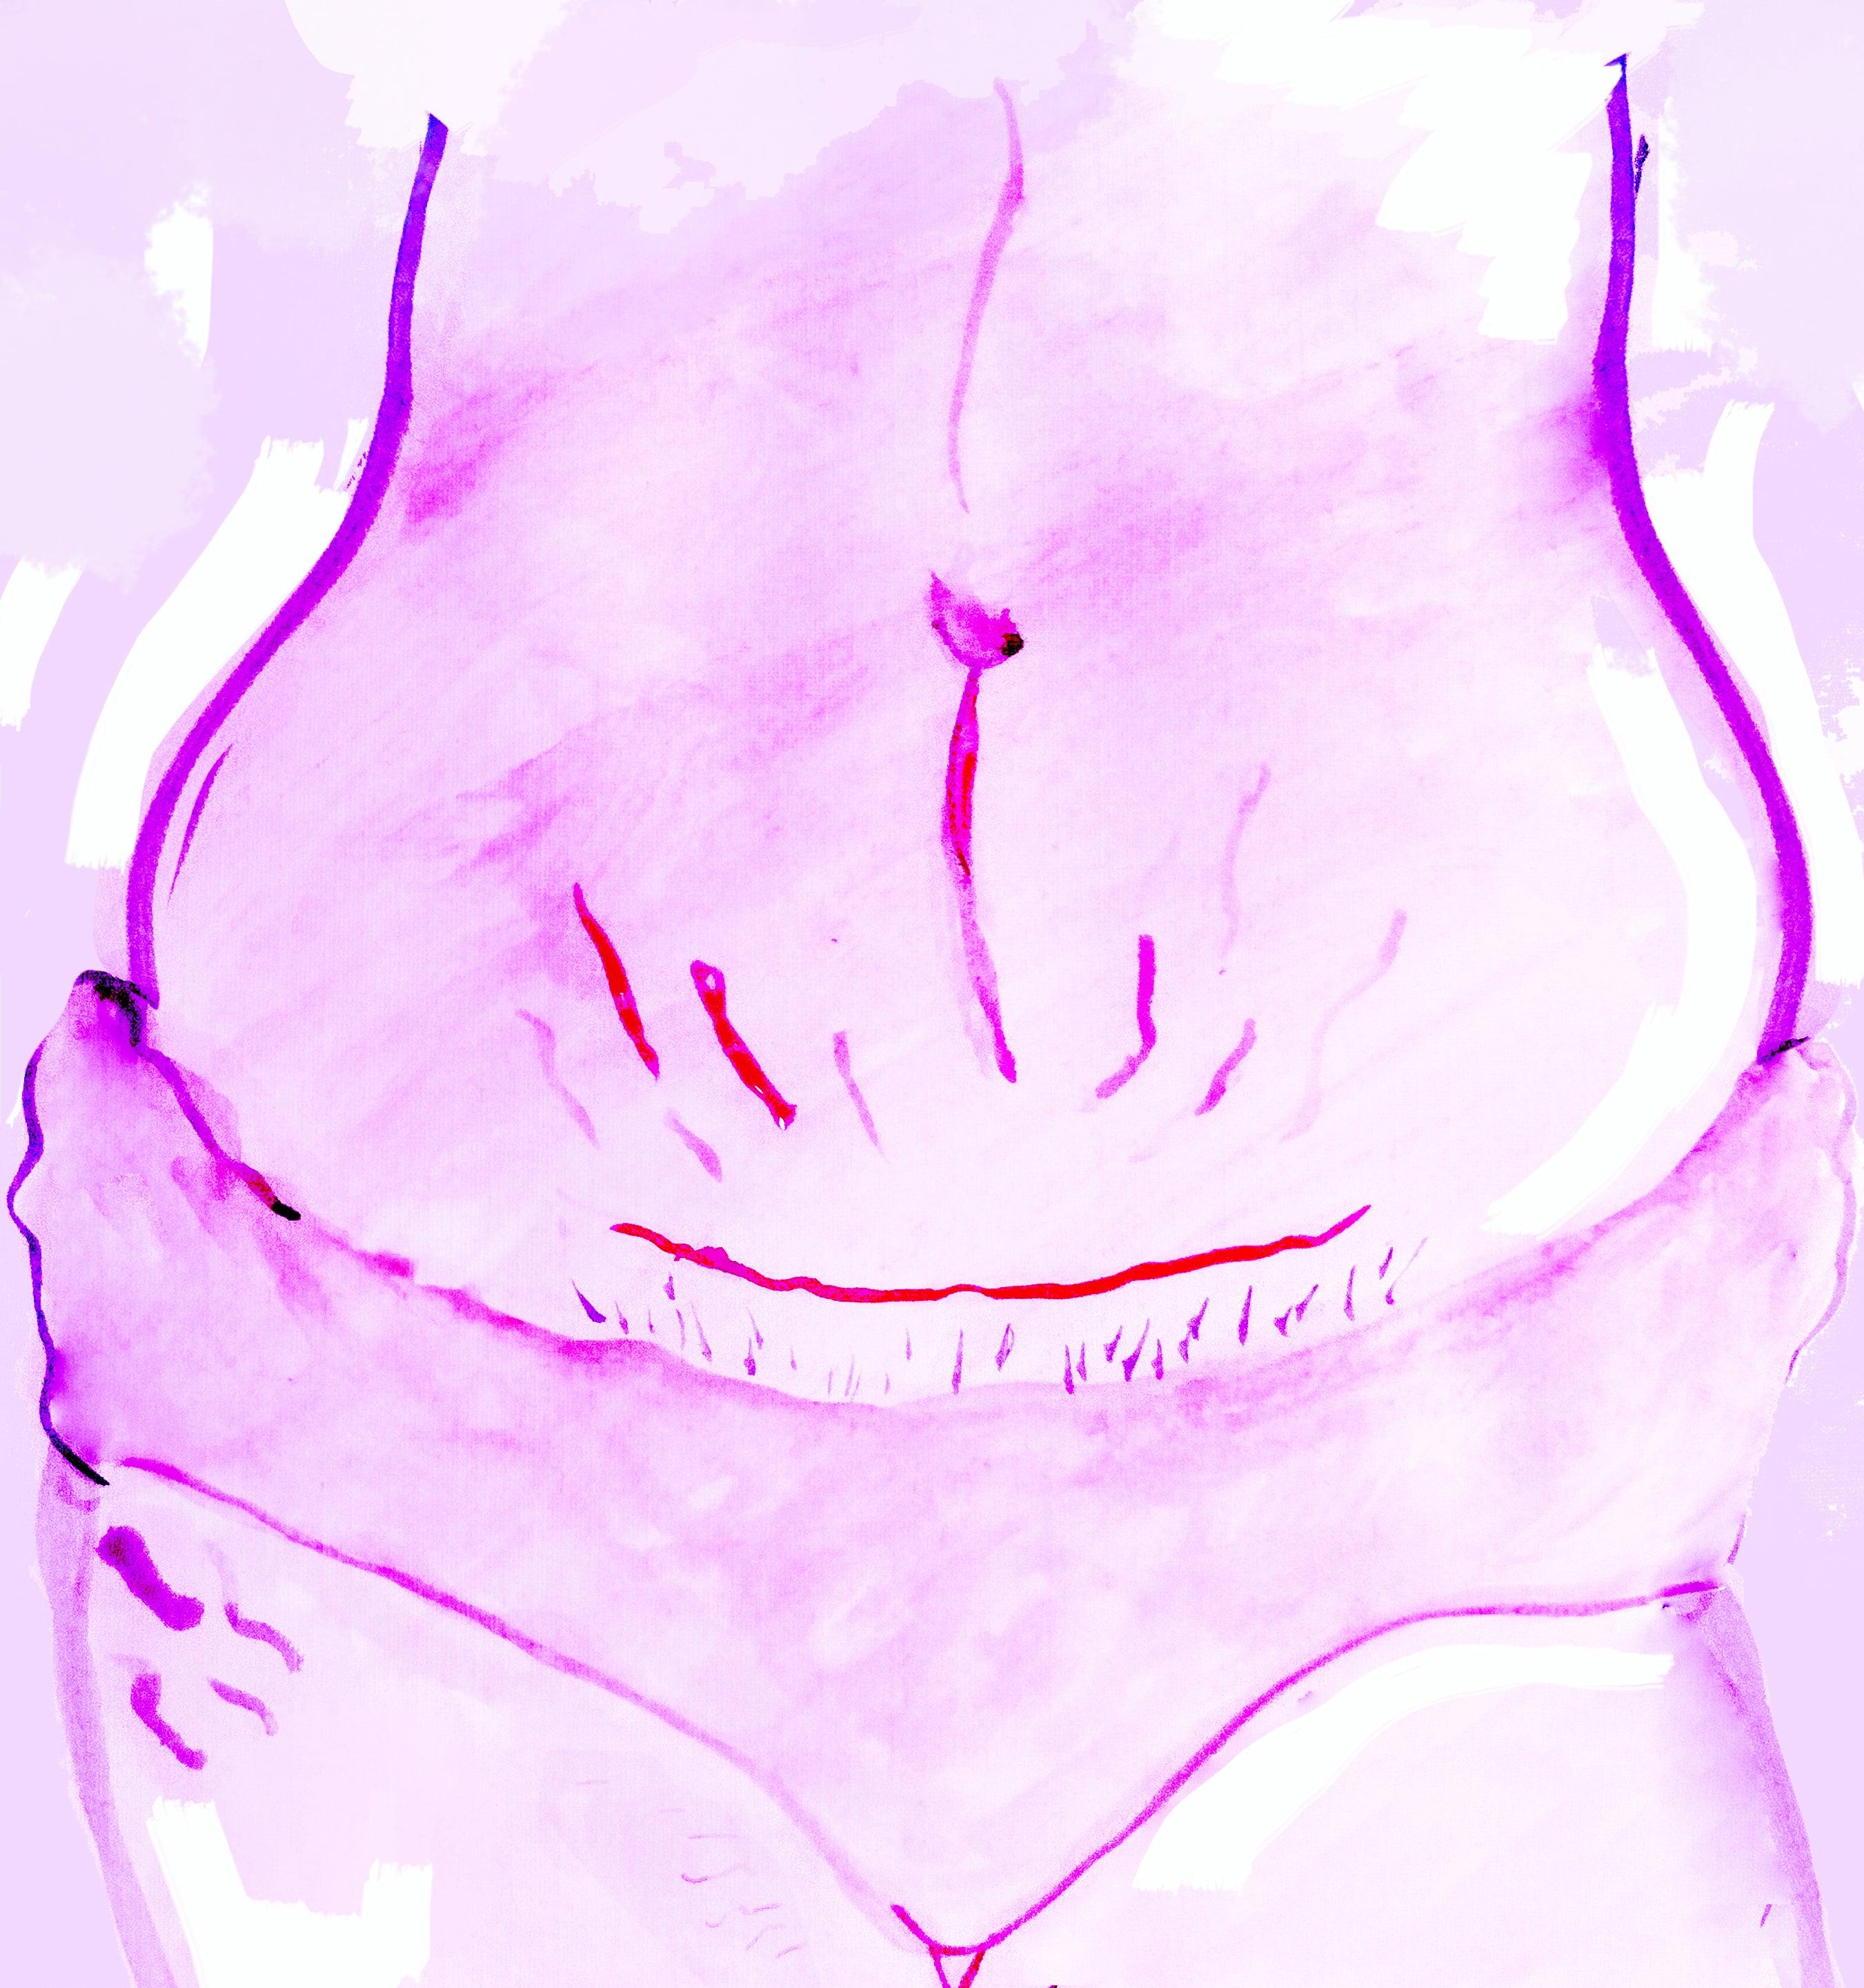 How to Care For a Caesarean Section Scar